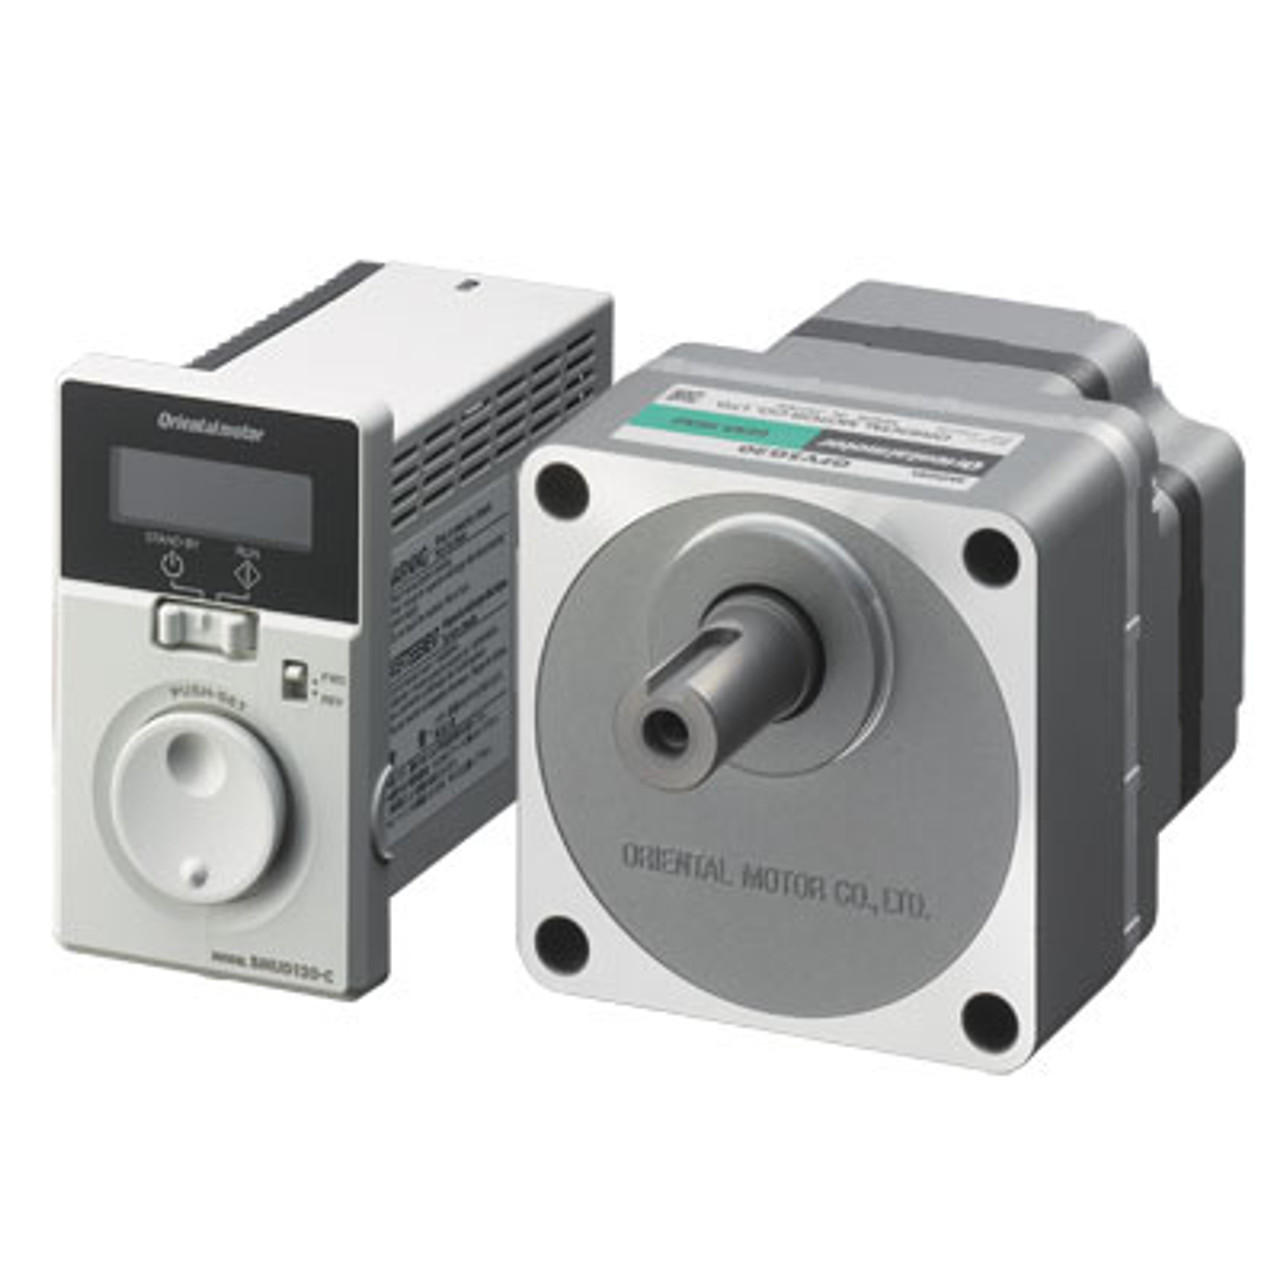 BMU5120CP-200 - Product Image